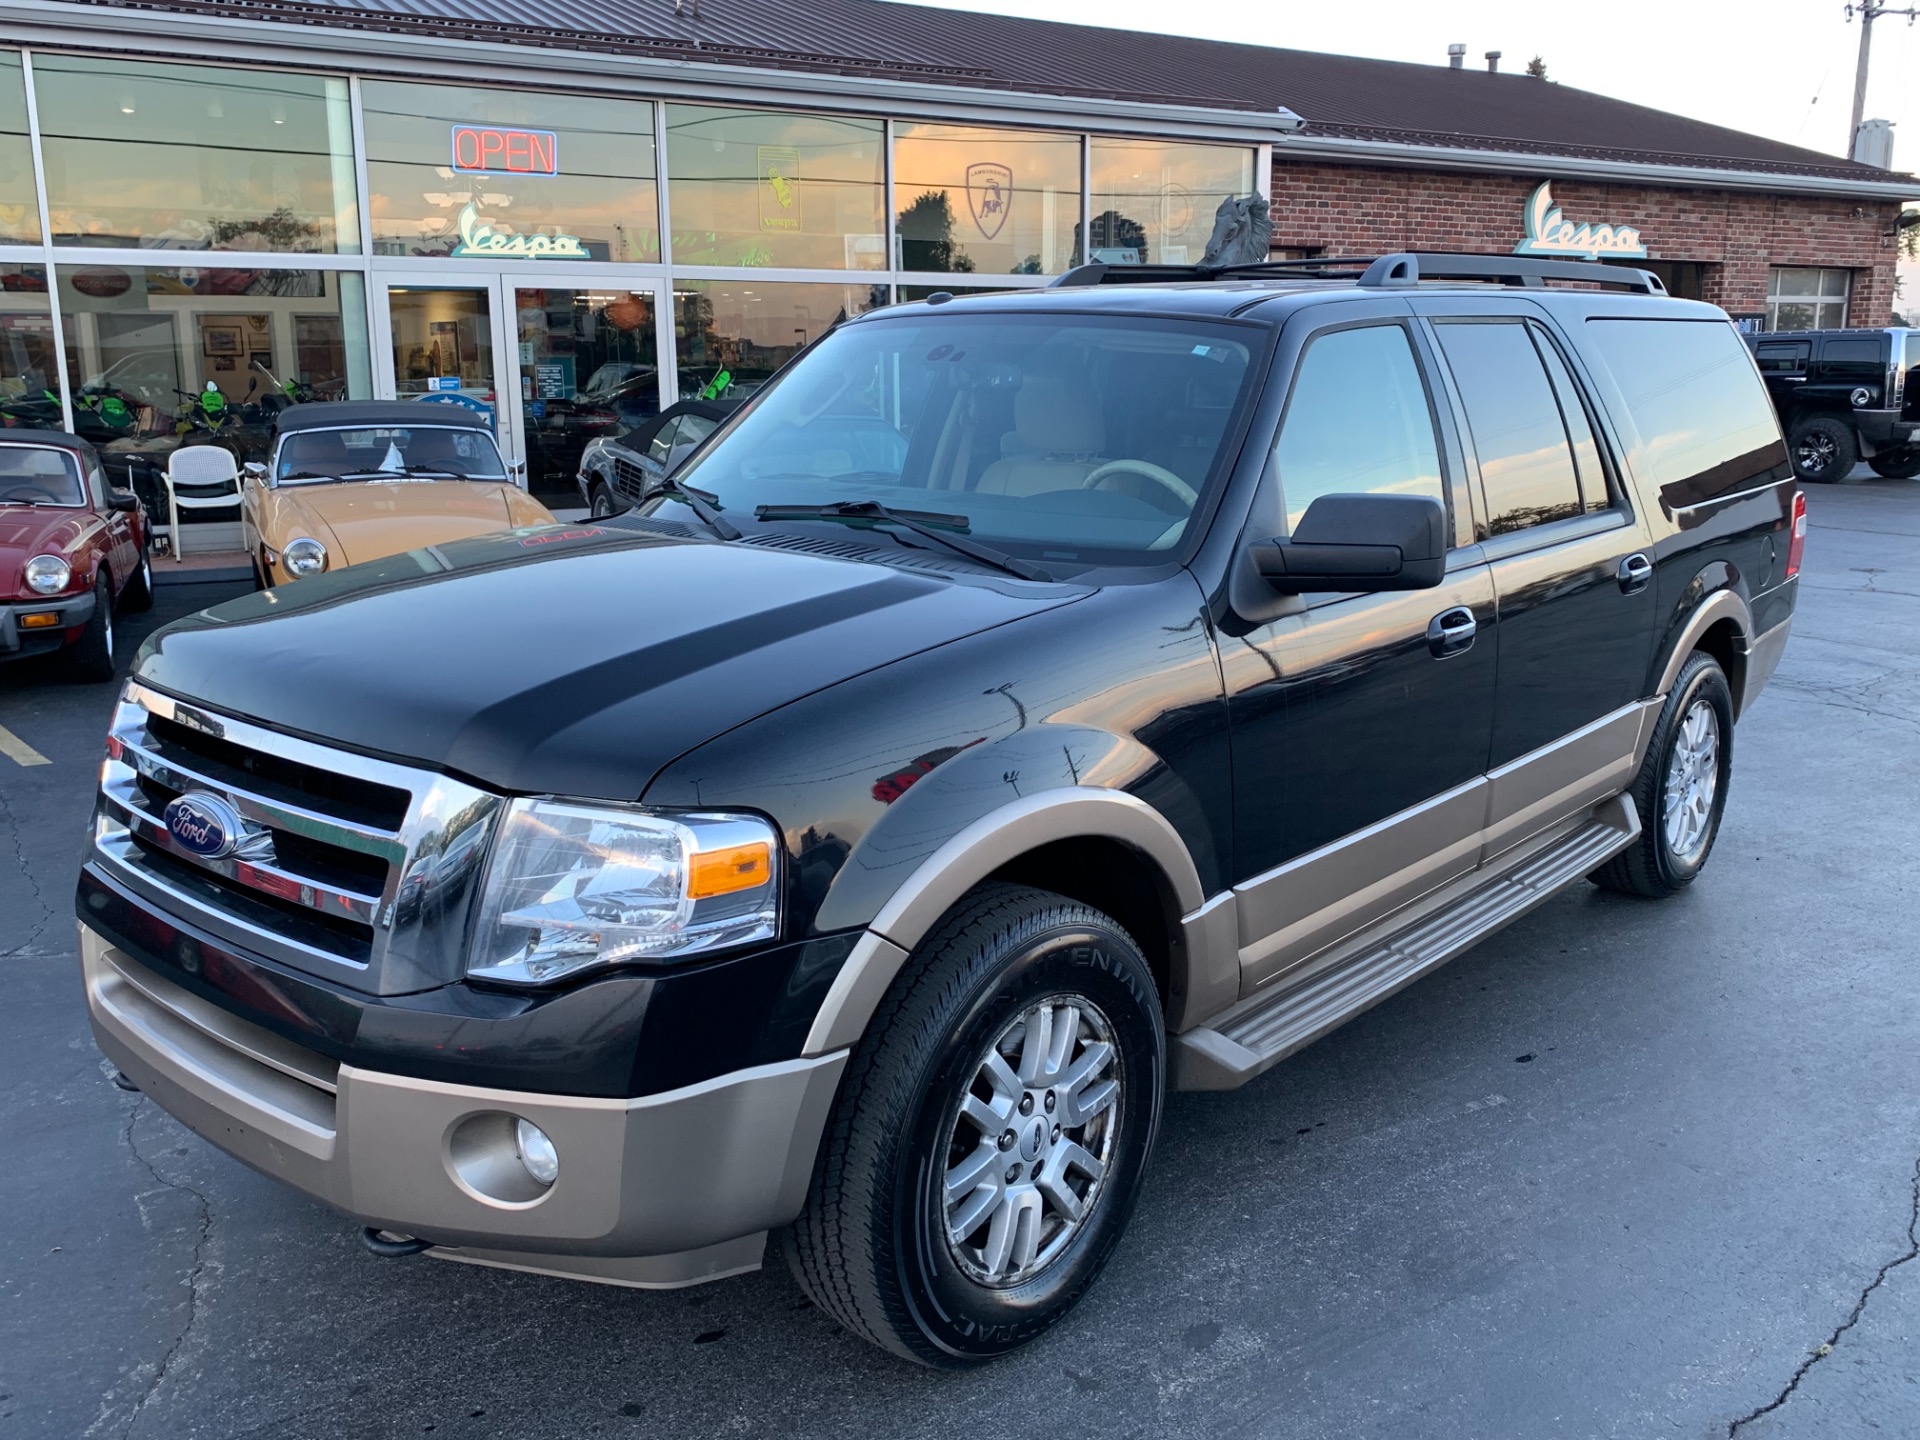 2013 Ford Expedition EL XLT Stock # 9212C for sale near Brookfield, WI | WI  Ford Dealer